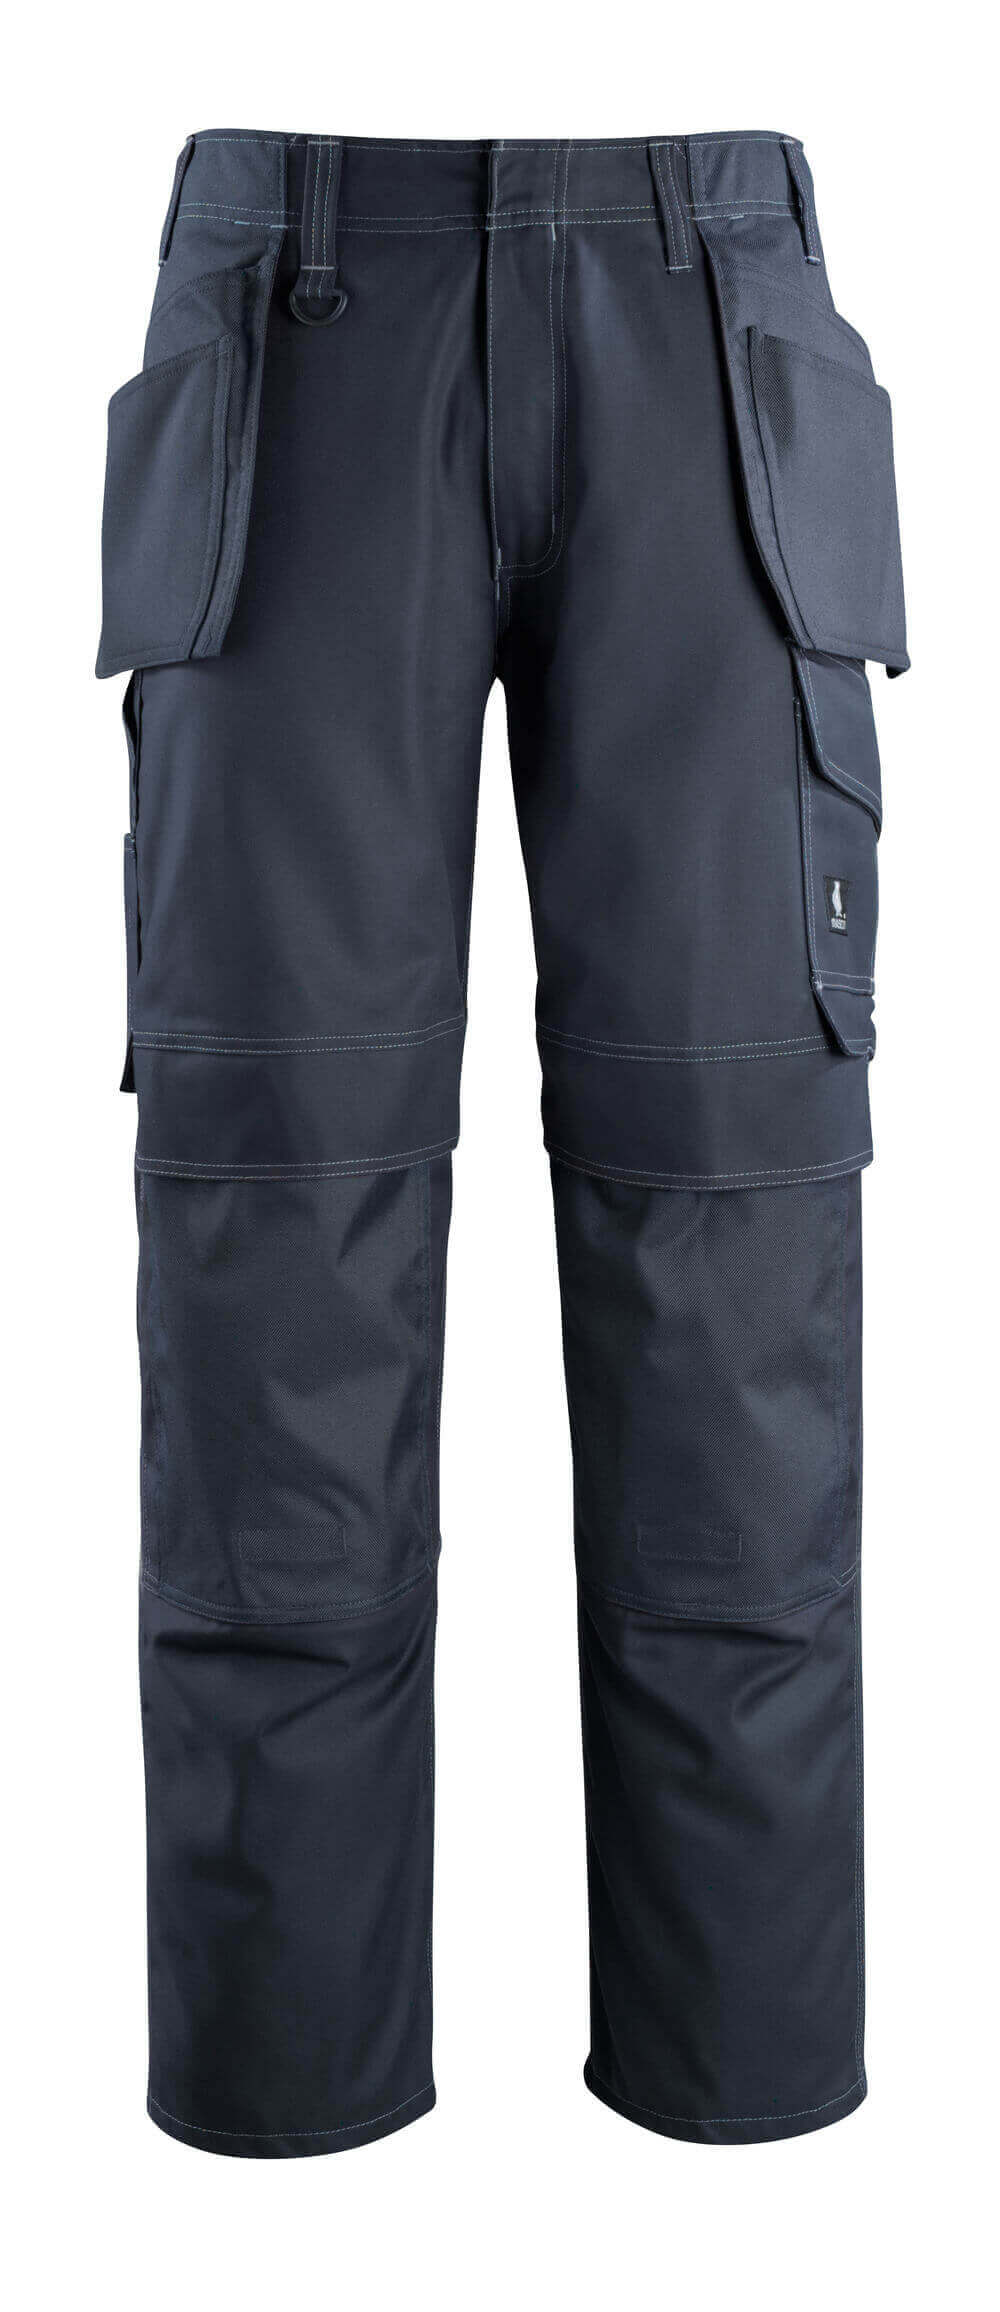 10131-154-010 Trousers with holster pockets - dark navy